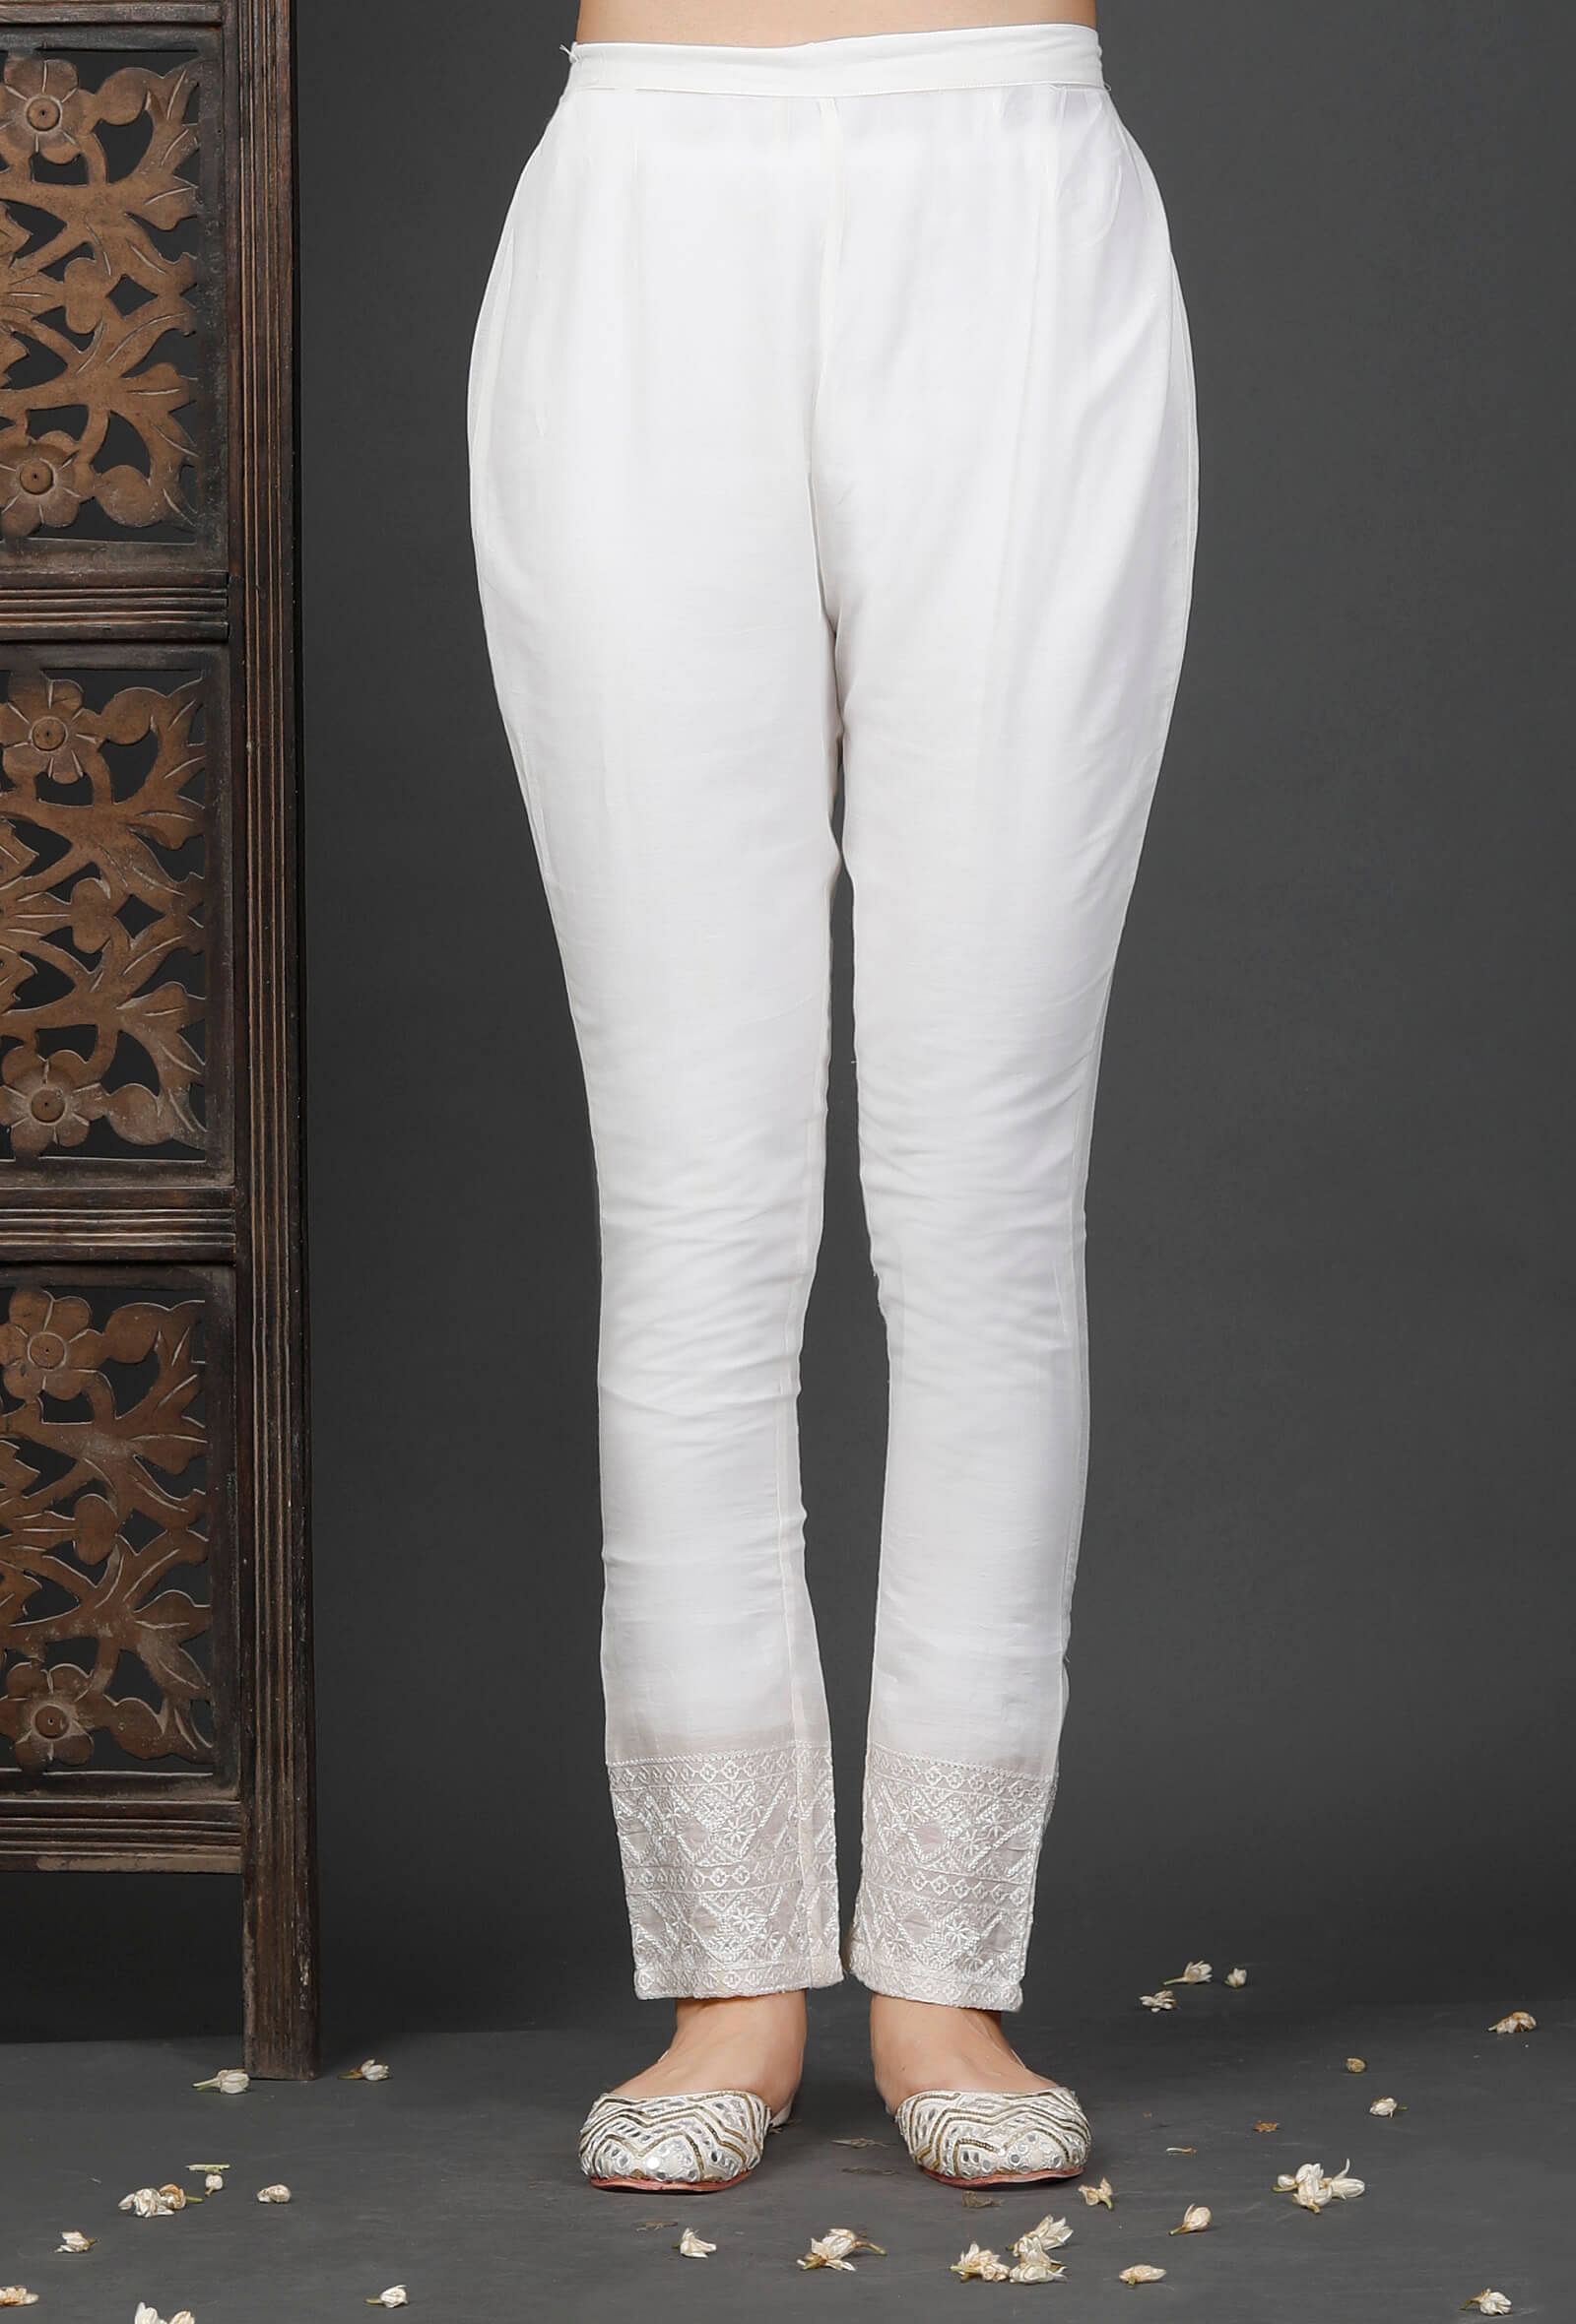 Buy White Ankle Length Pant Cotton Samray for Best Price Reviews Free  Shipping